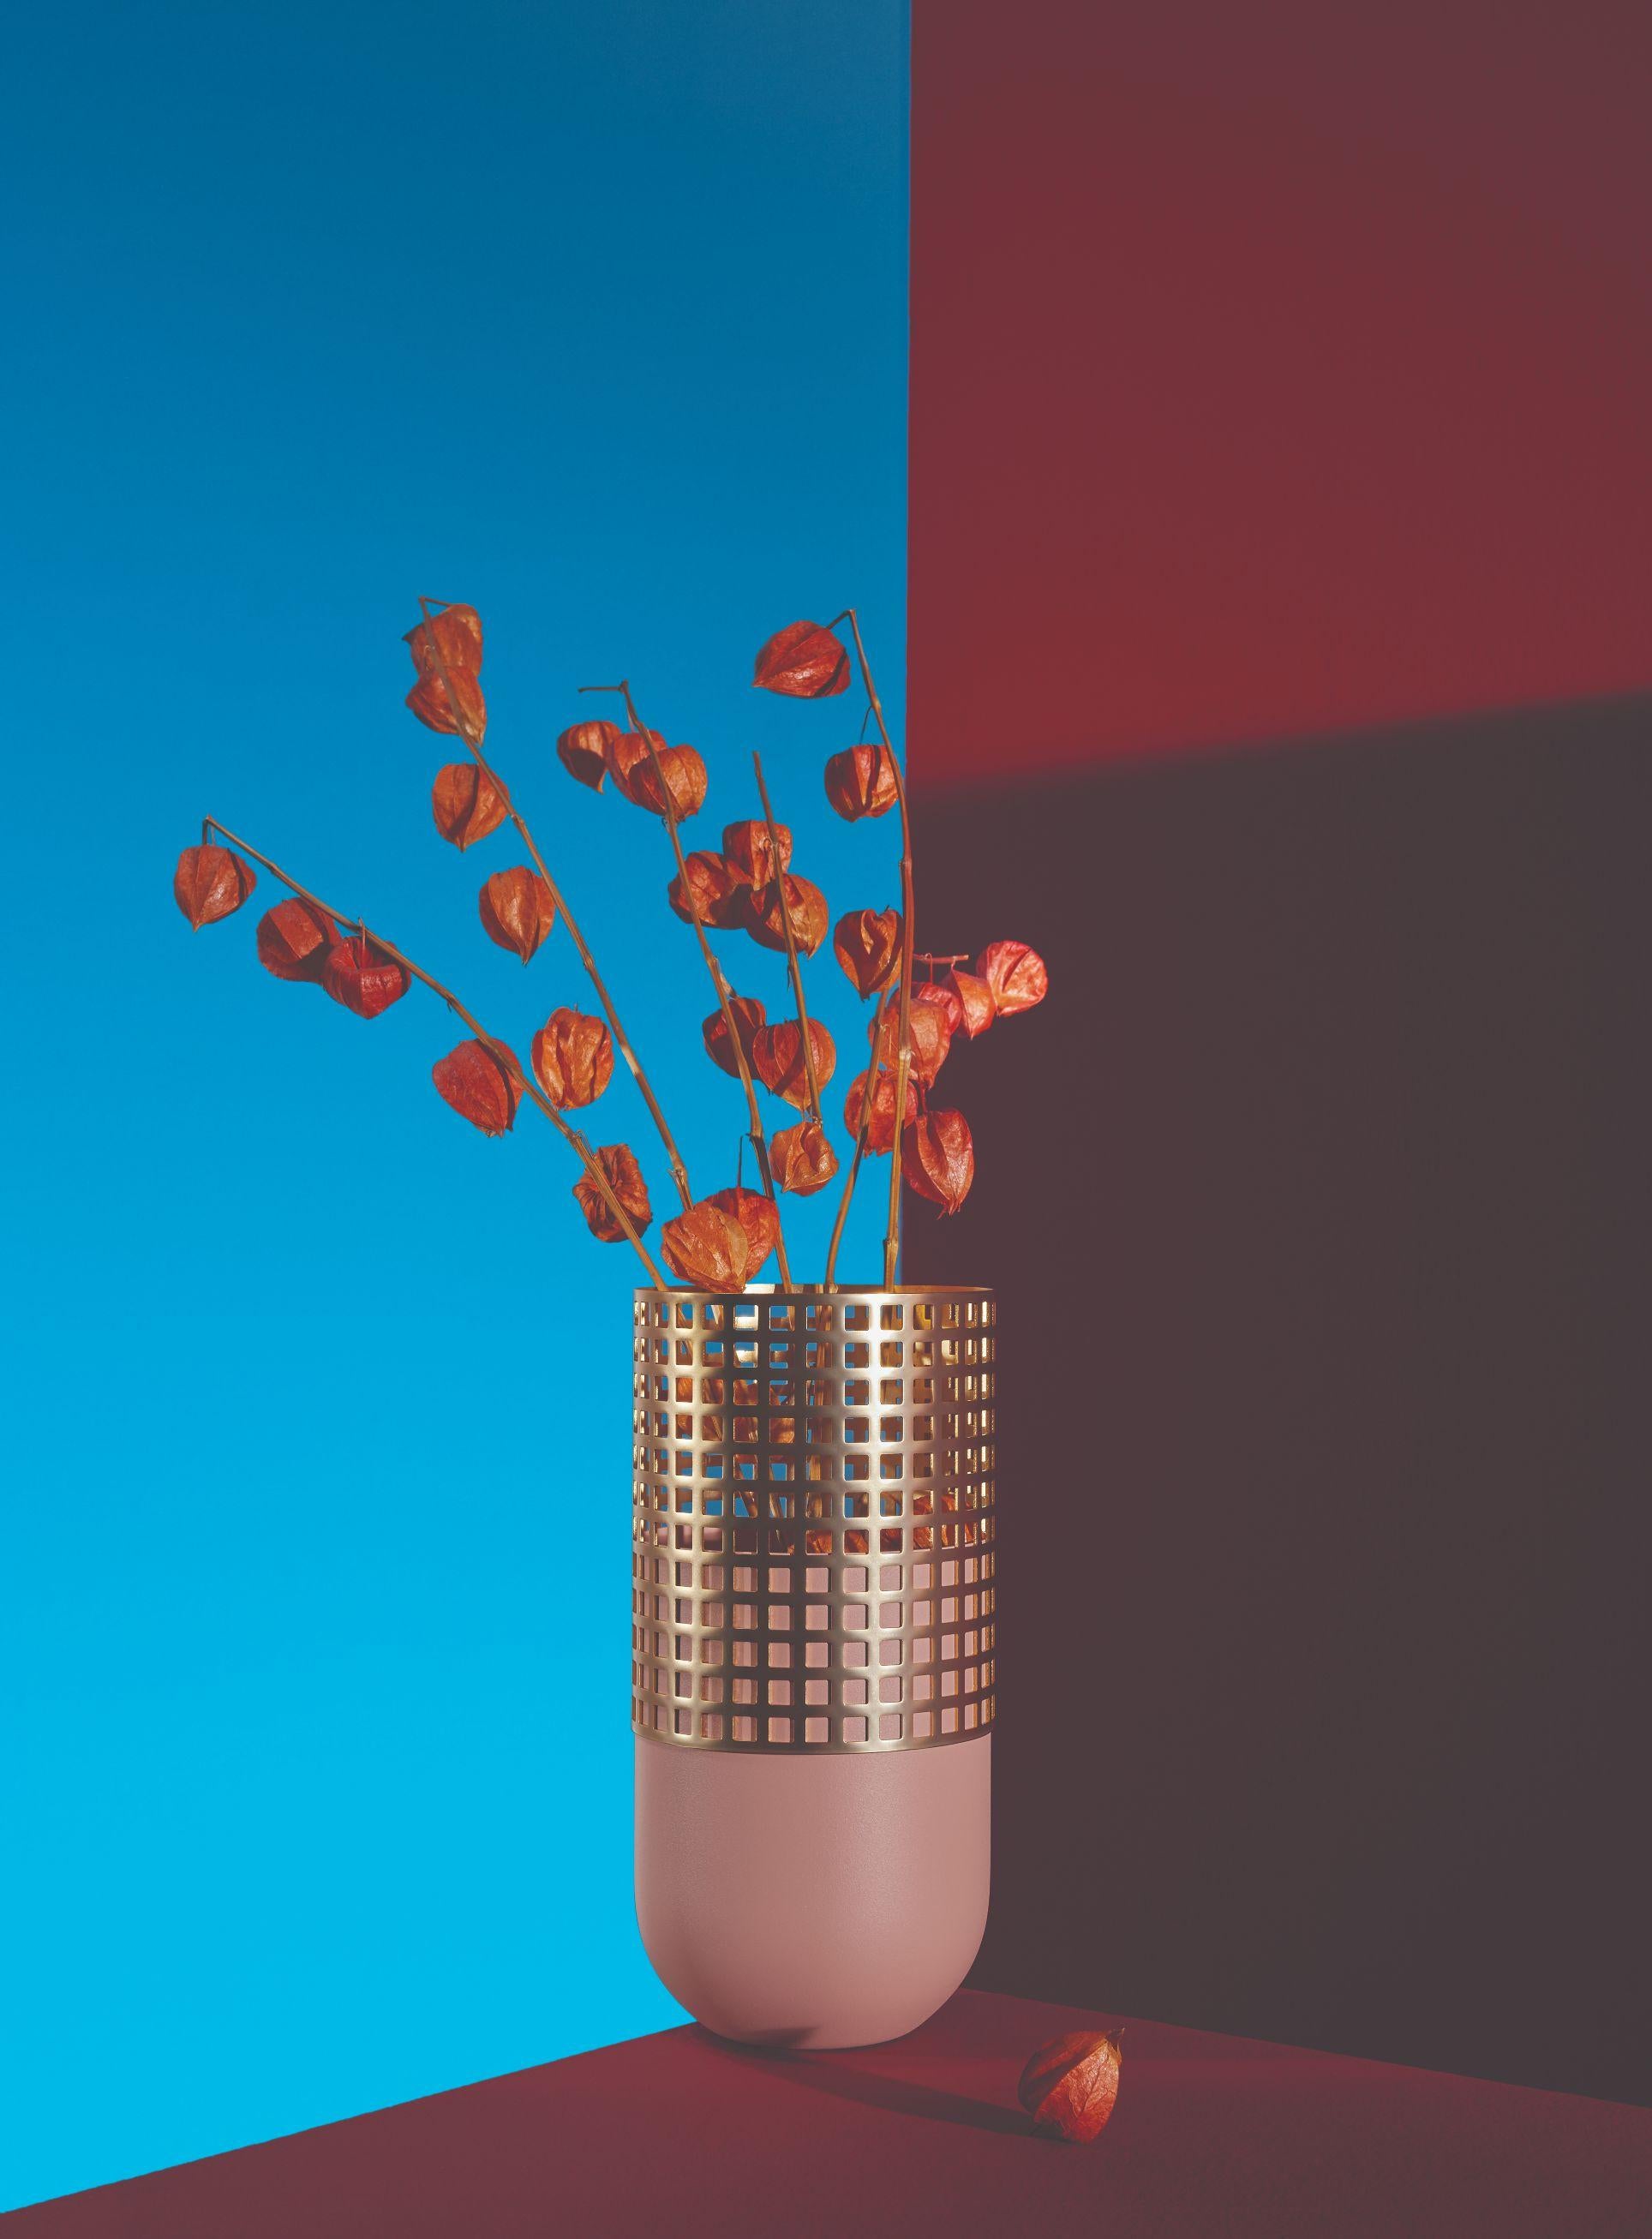 Mia tall vase by Mason Editions
Dimensions: 15 x 15 x 31 cm
Materials: Iron

The collection includes three objects with different shapes and functions.
Mia’s decisive impression is given by the contrast that is created between the soft lines of